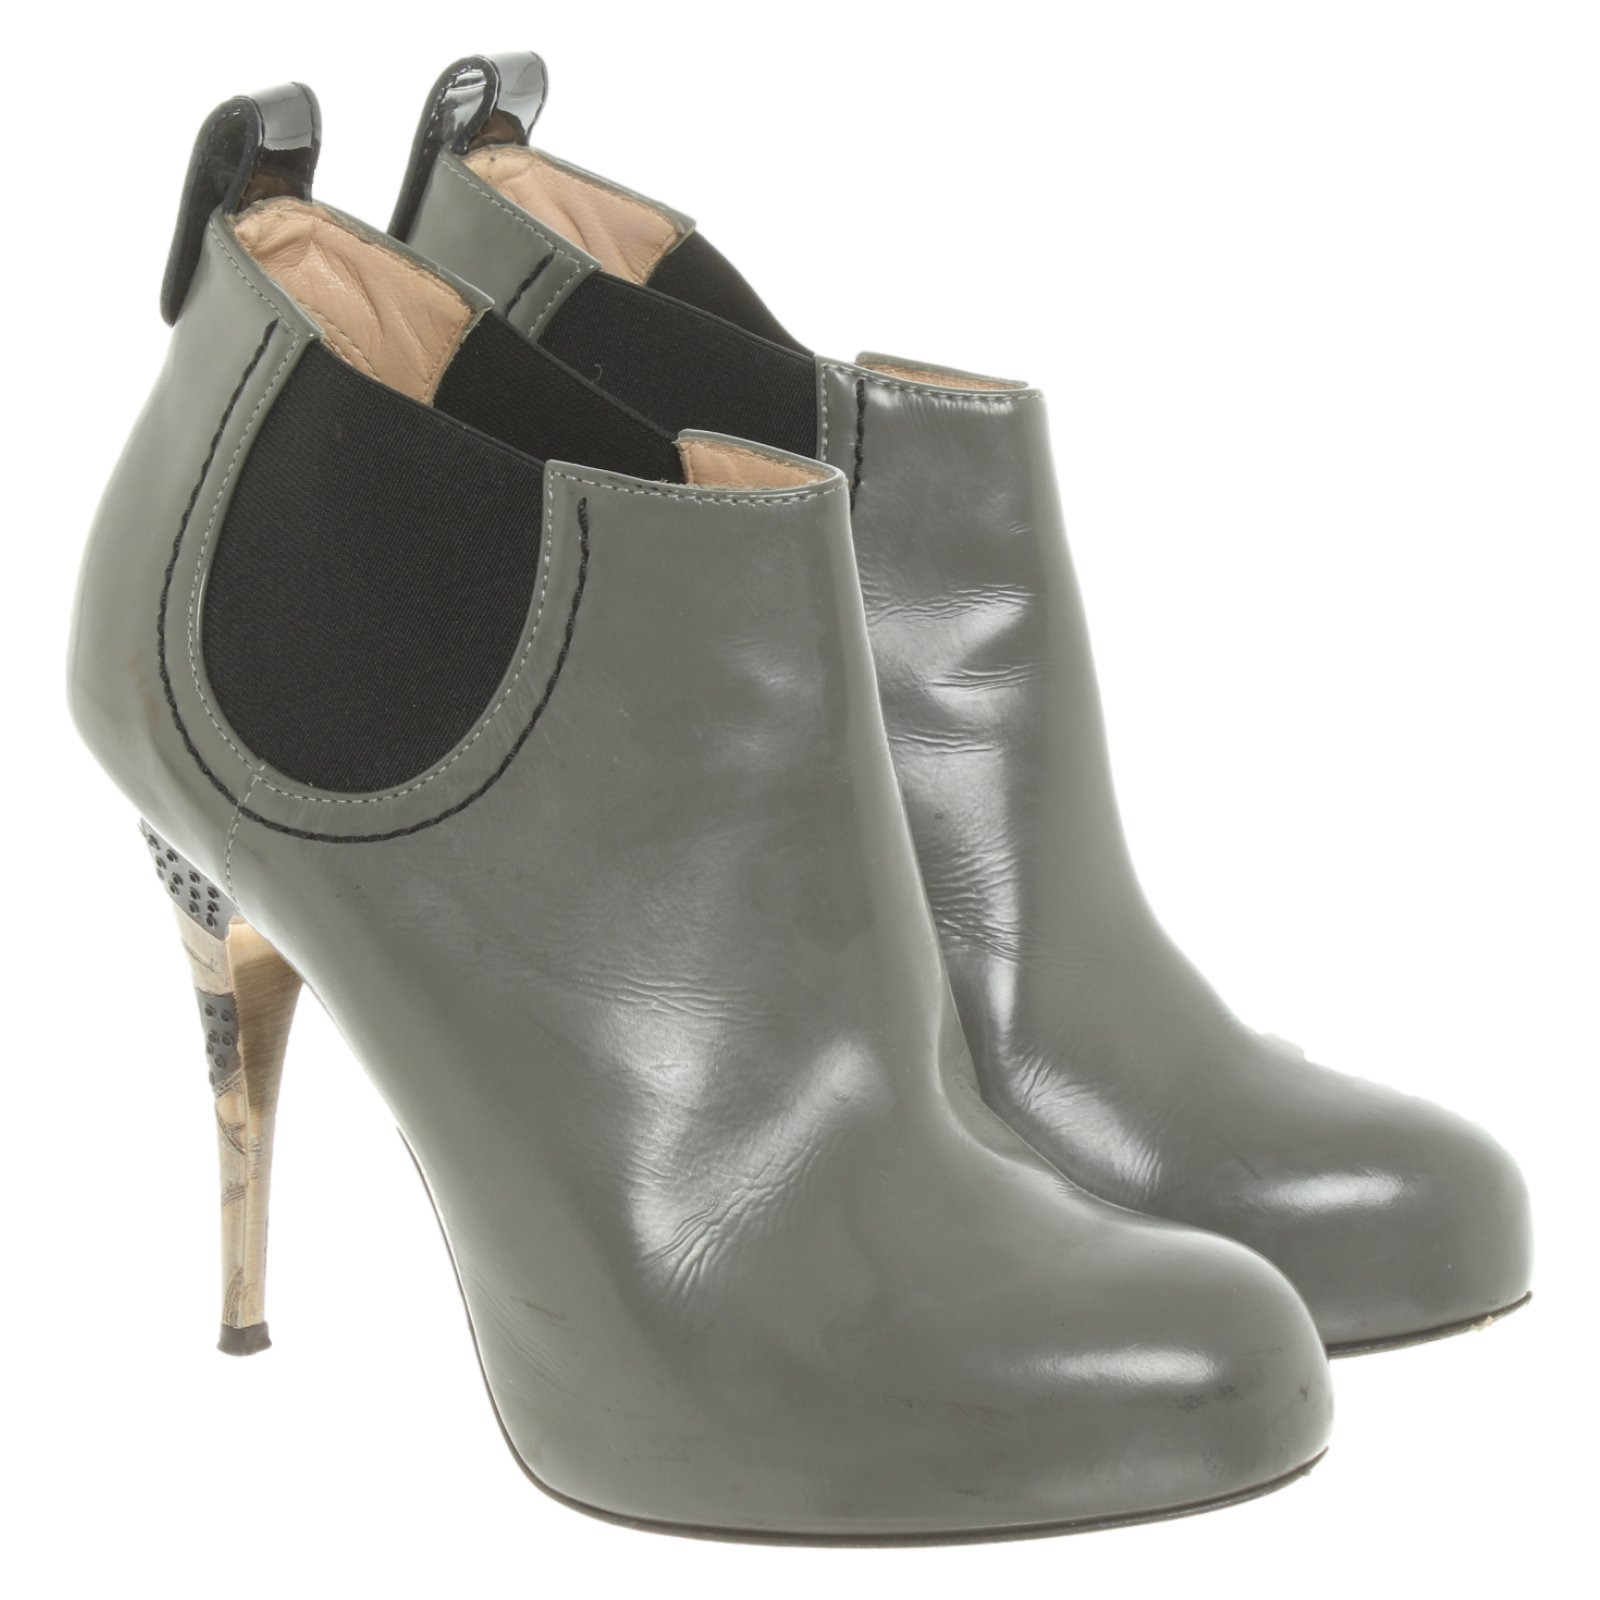 Giuseppe Zanotti Ankle boots Suede in Grey - Second Hand Giuseppe Zanotti  Ankle boots Suede in Grey buy used for 134€ (4114225)